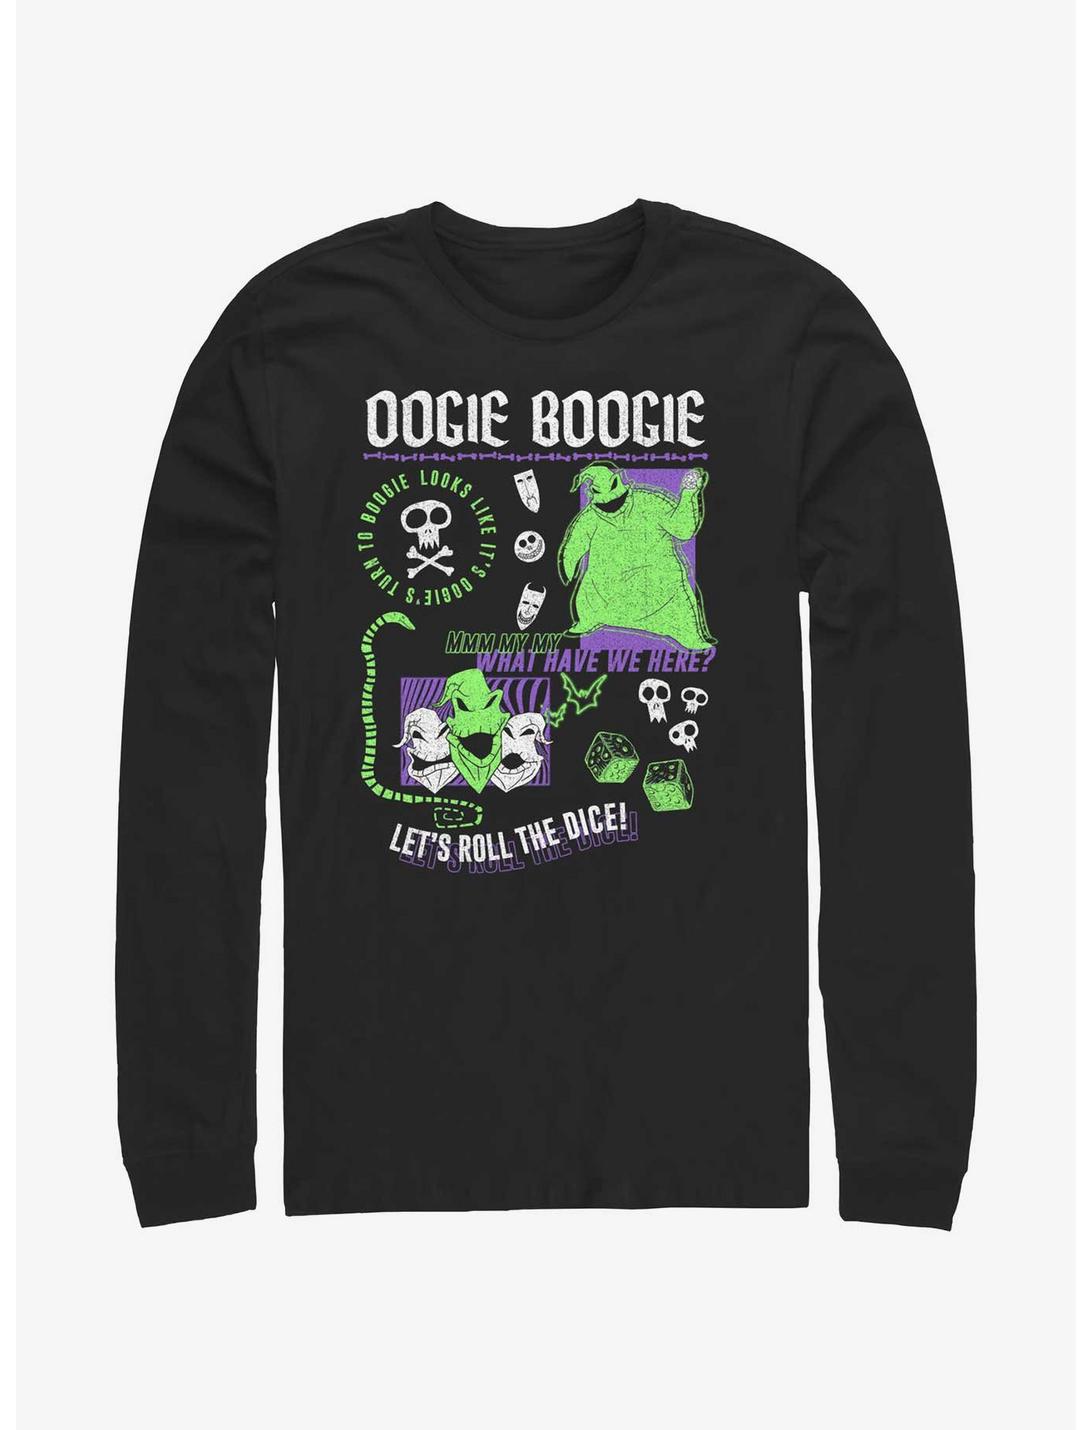 Disney The Nightmare Before Christmas Oogie Boogie Let's Roll The Dice Long-Sleeve T-Shirt, BLACK, hi-res